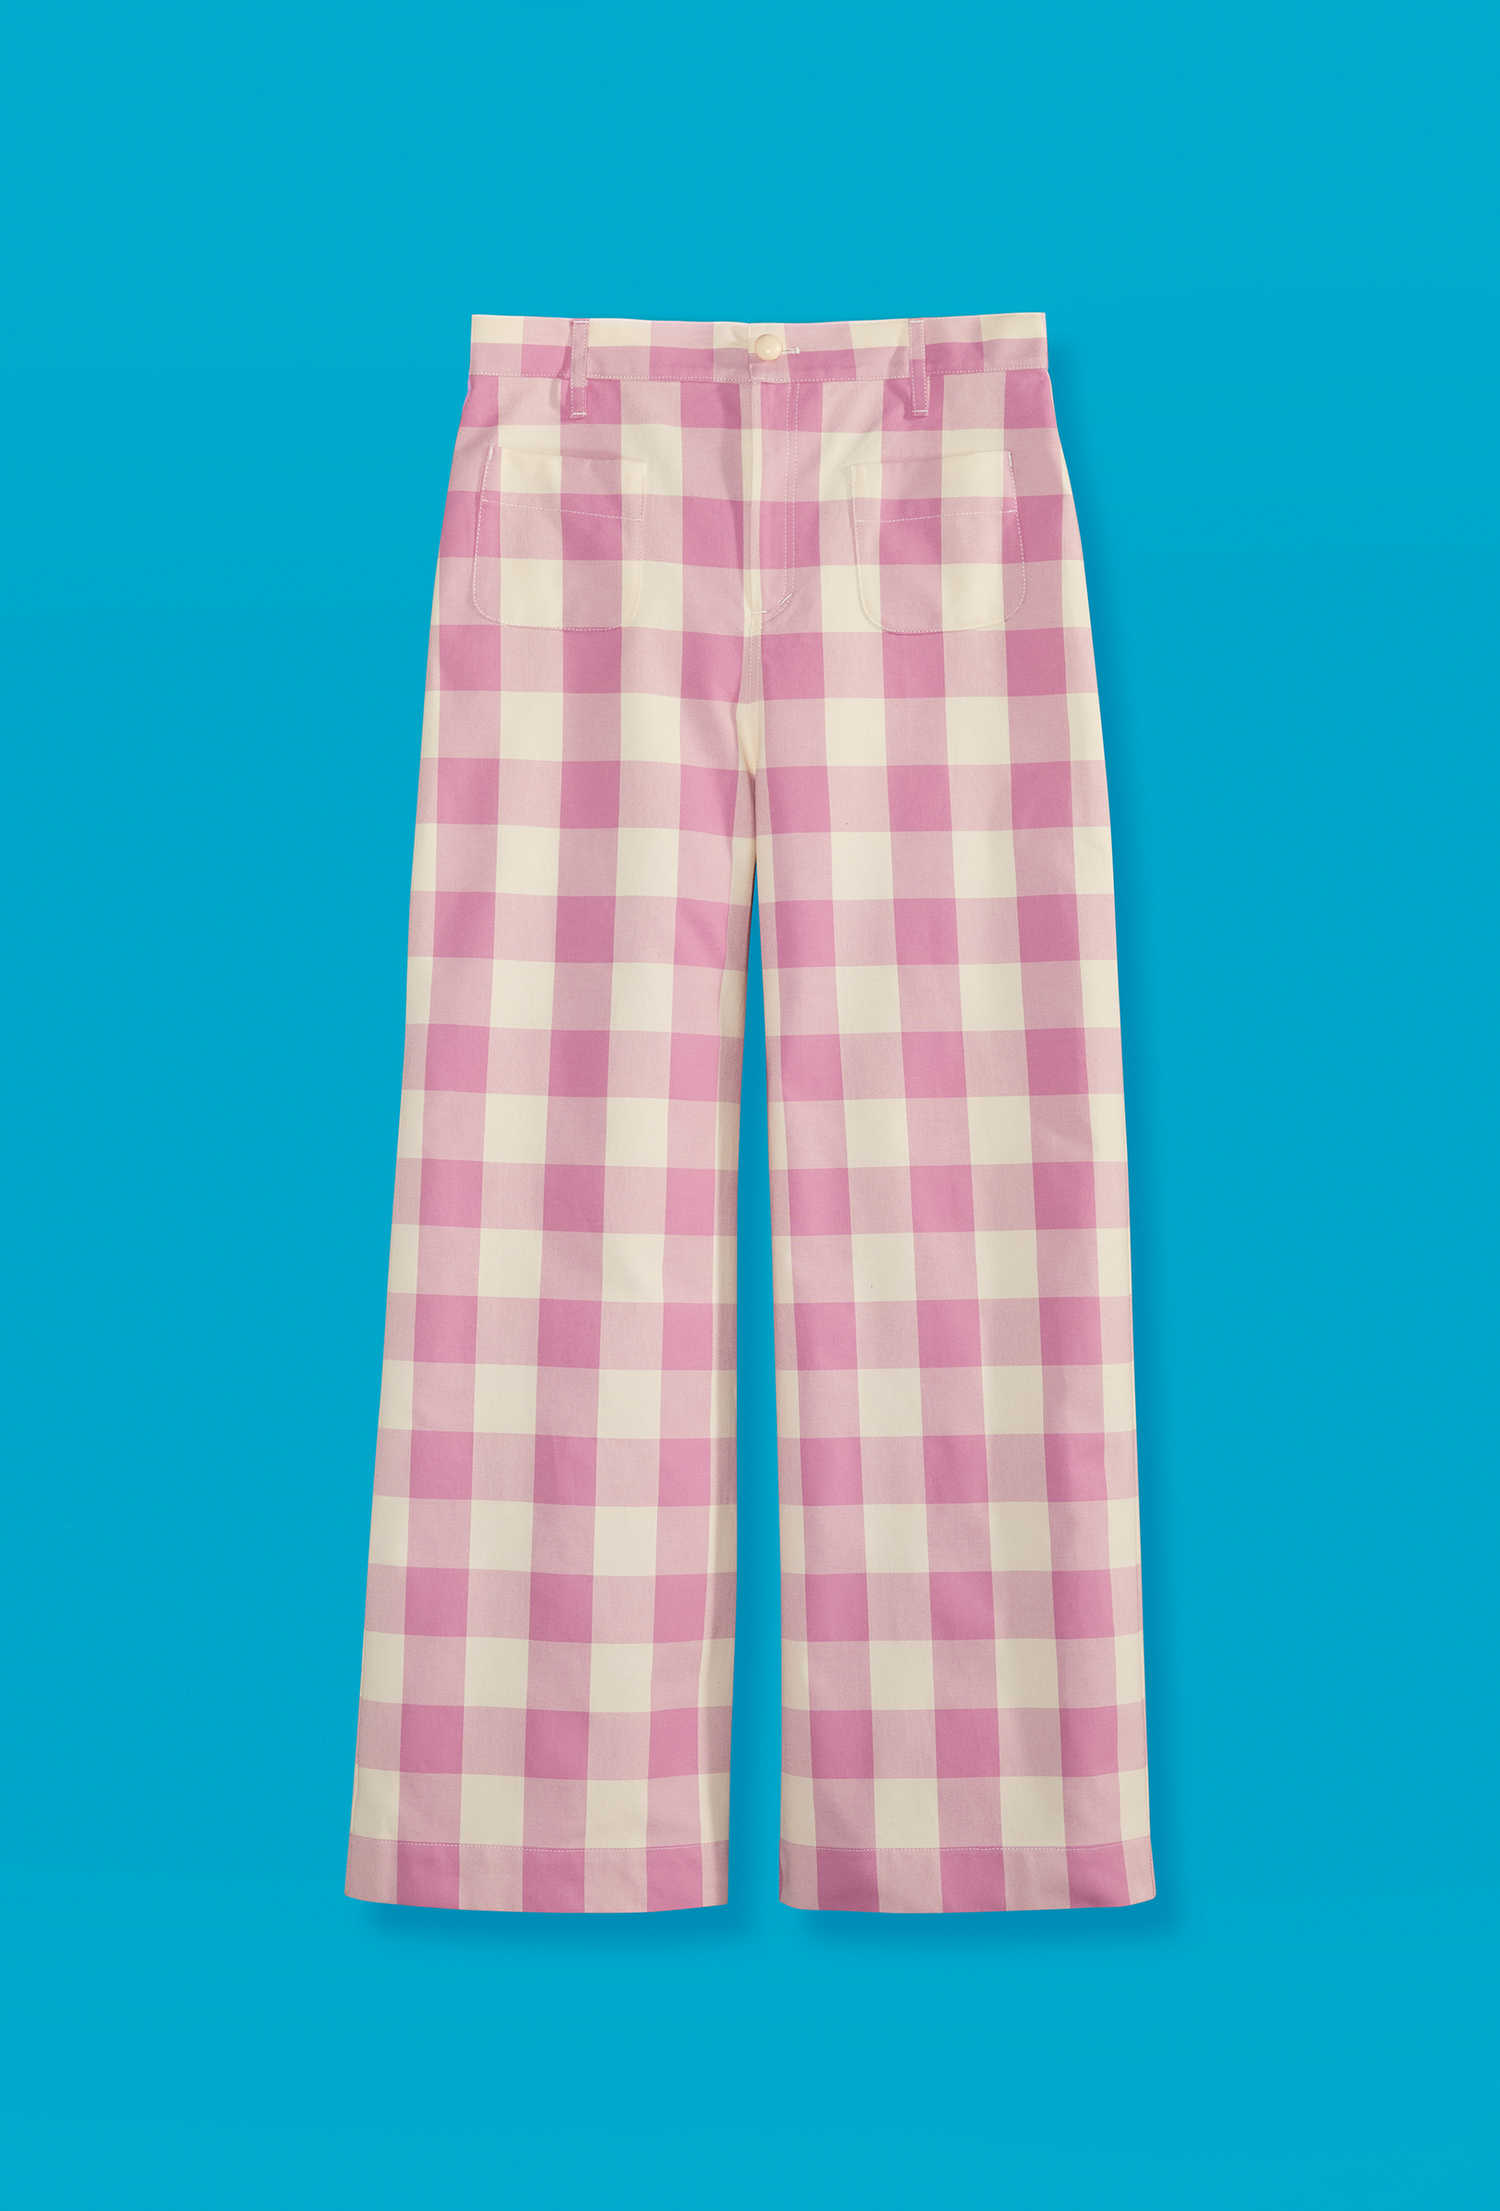 High rise pants with pink and white checks exposed on a blue background